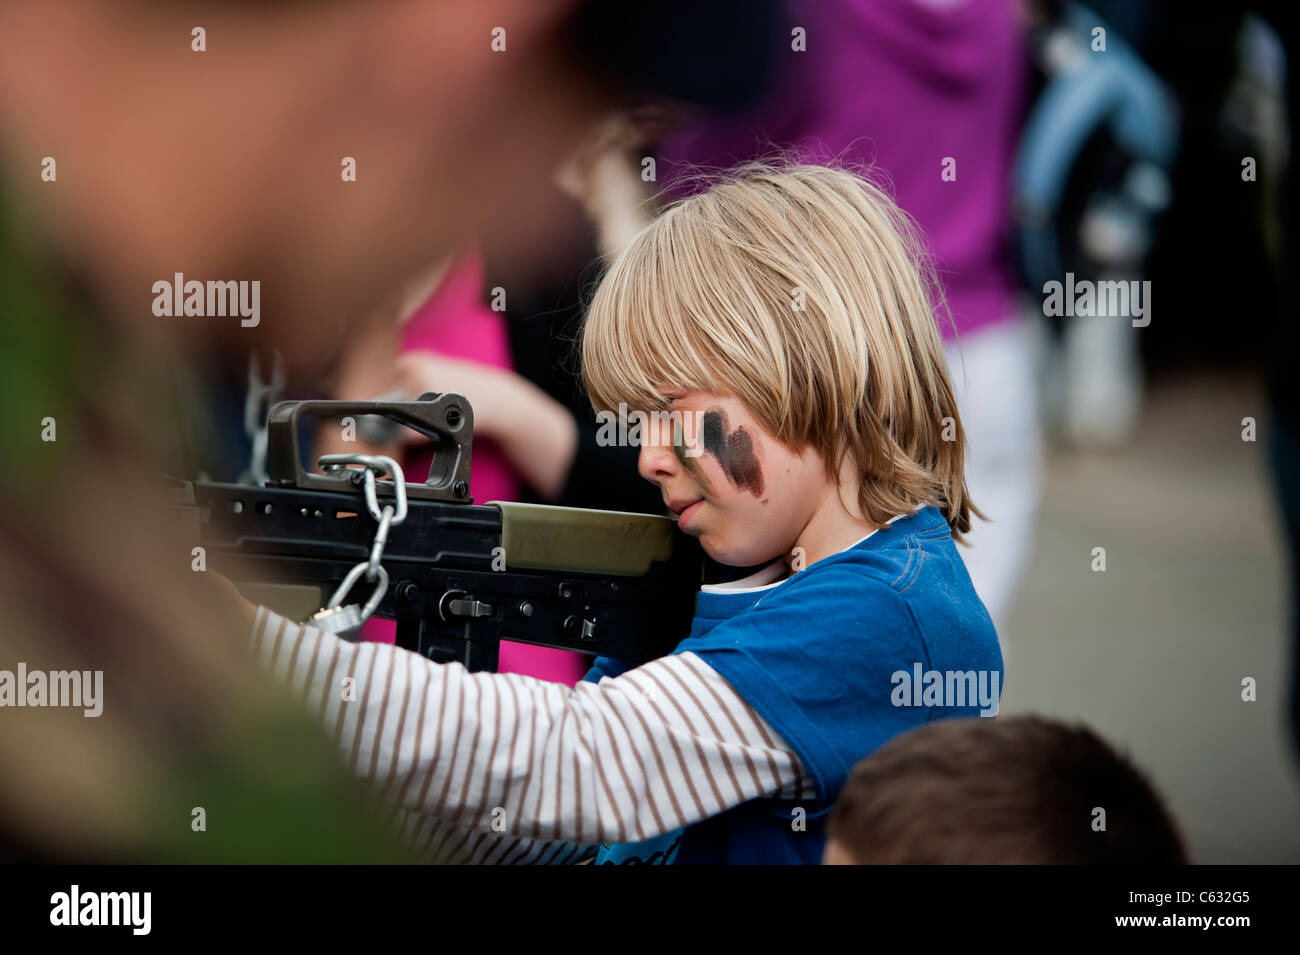 A boy holding a rifle at an army exhibition stand. Eastbourne, east Sussex. England, UK Stock Photo